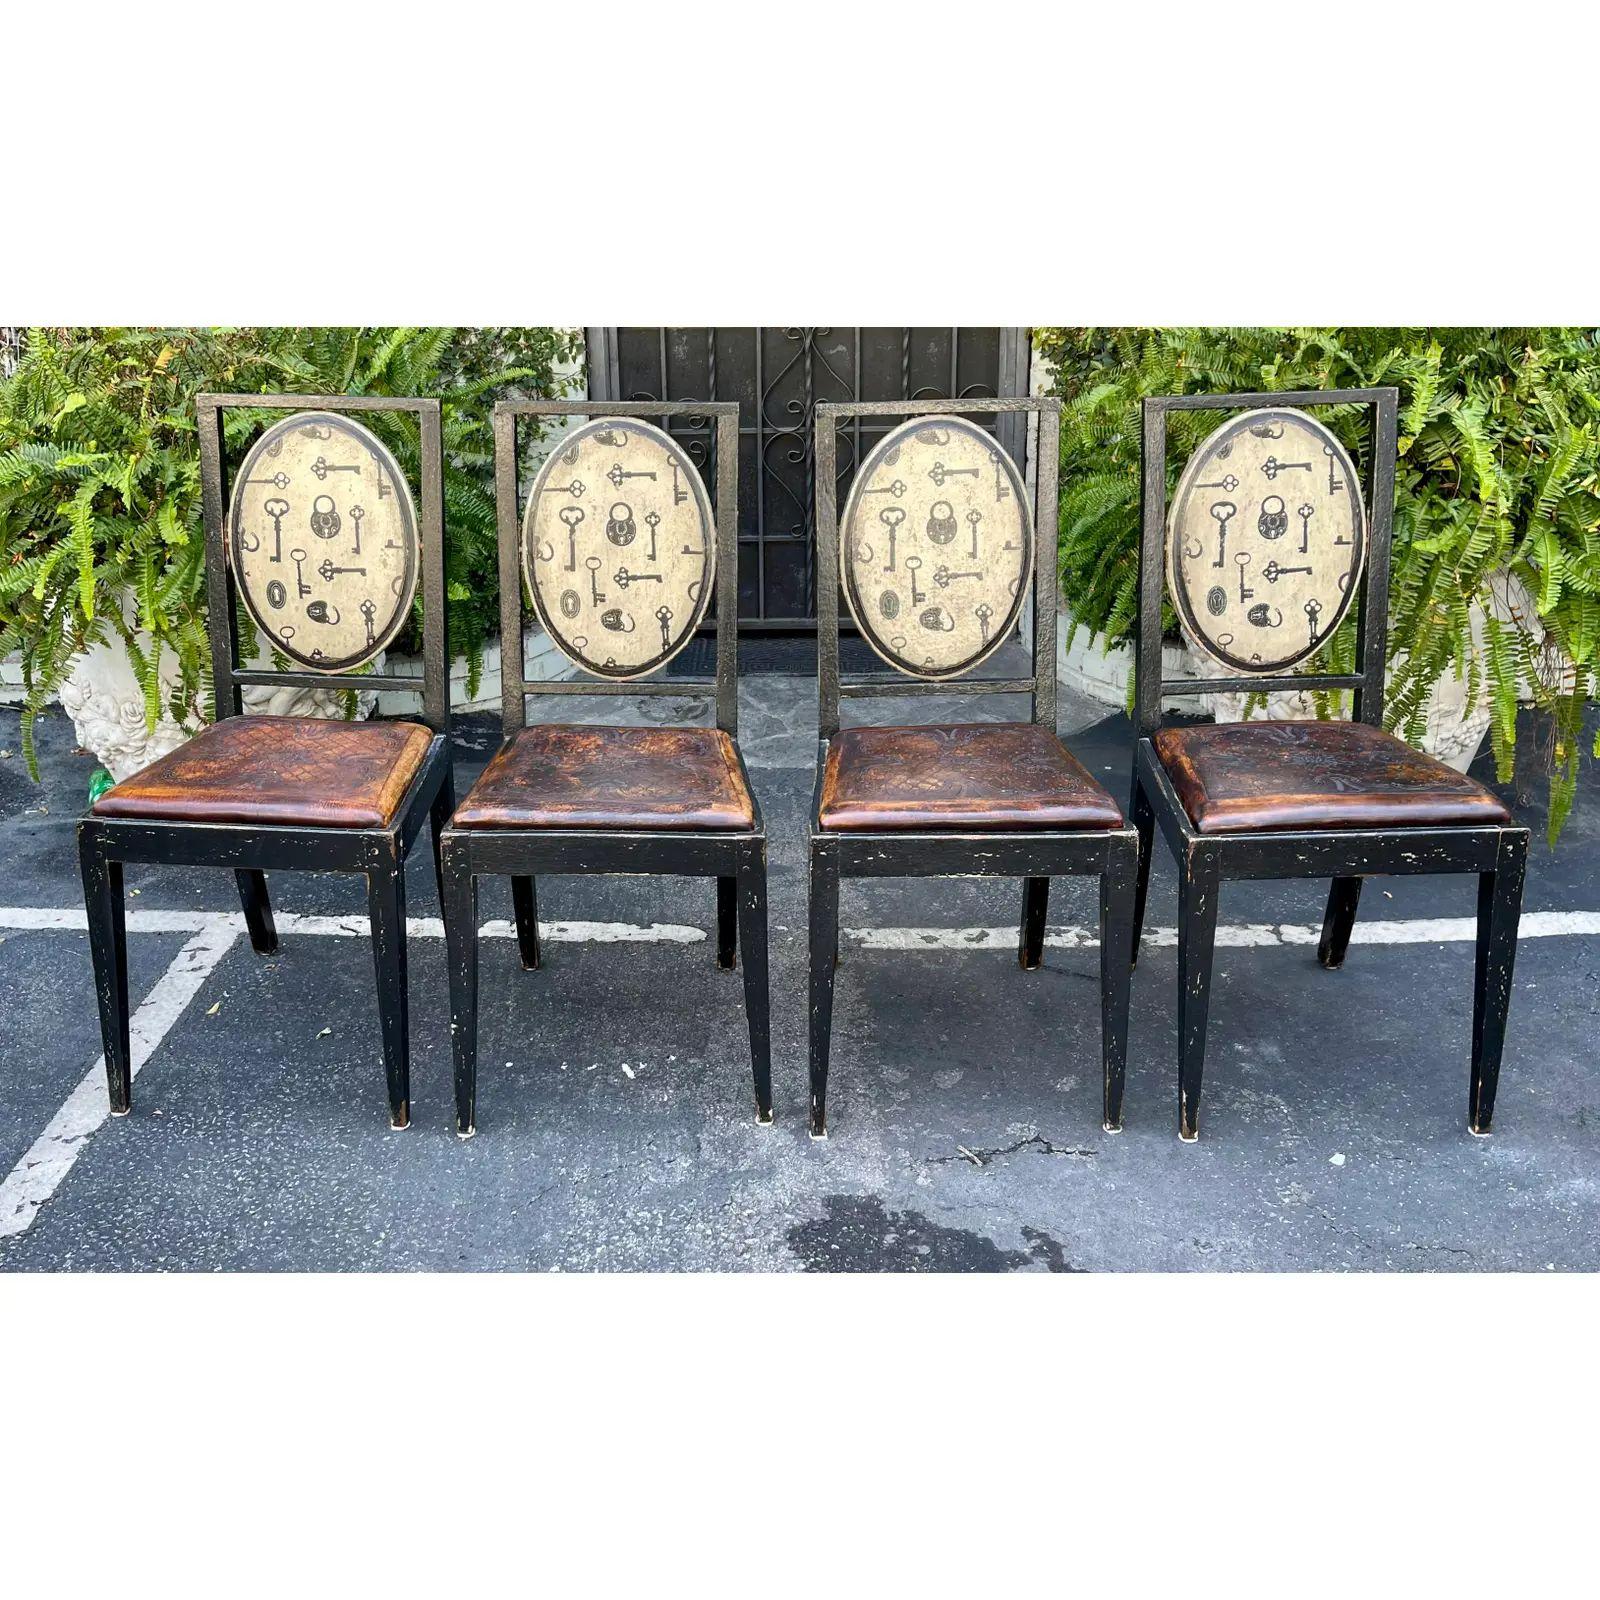 Set of 4 Equator Furniture Company Rustic Tooled Leather Painted Chair, 1990s In Good Condition For Sale In LOS ANGELES, CA